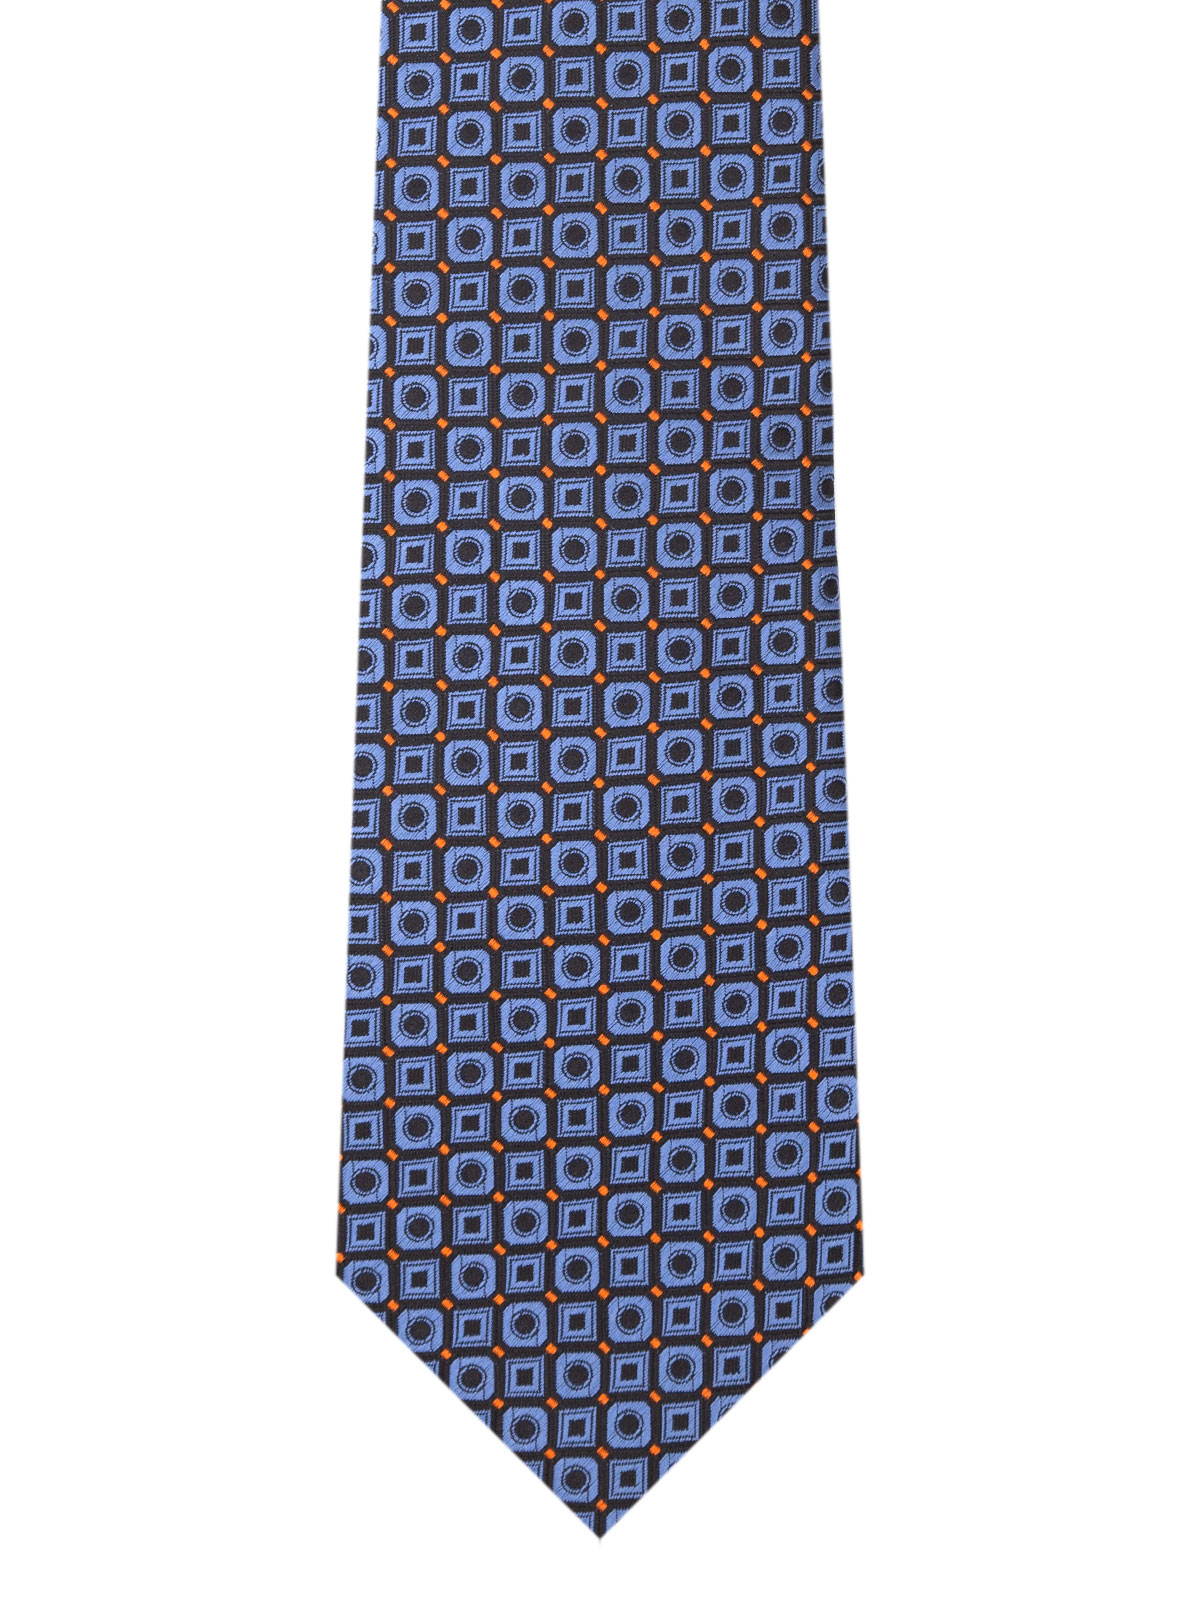 Tie in black with blue patterns - 10166 - € 14.06 img2